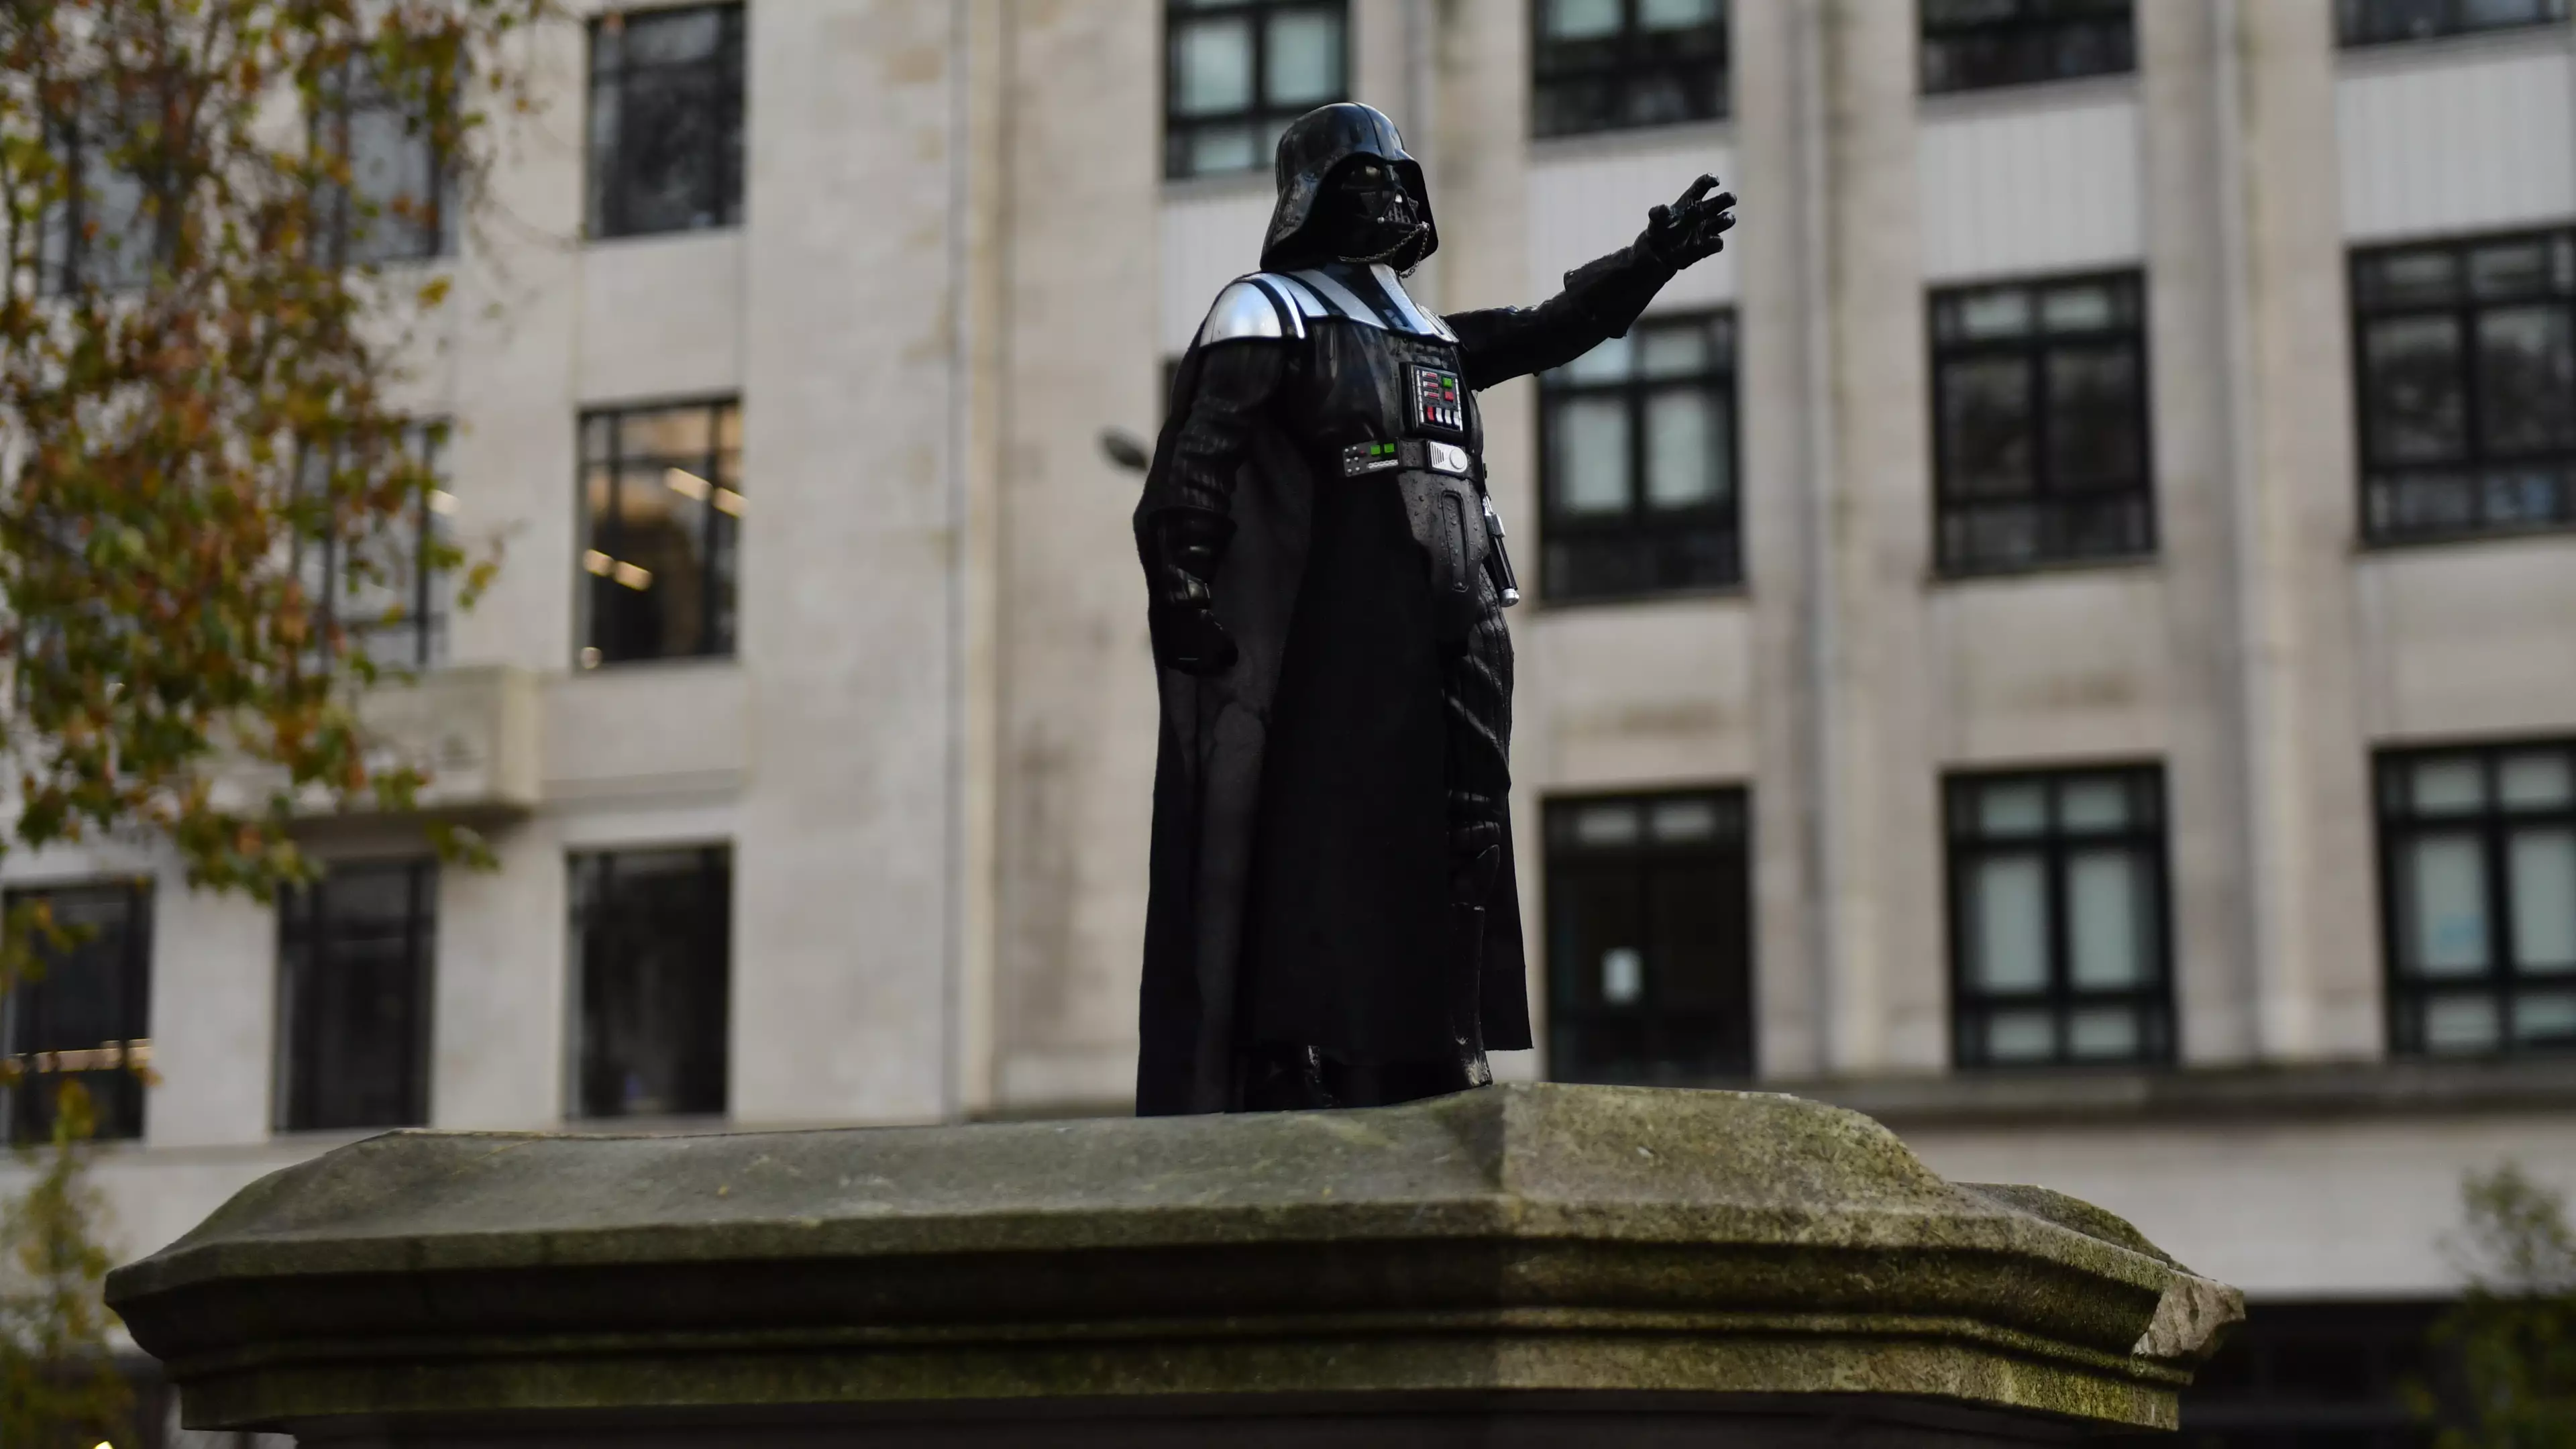 Darth Vader Statue Appears On Edward Colston Plinth In Tribute To David Prowse